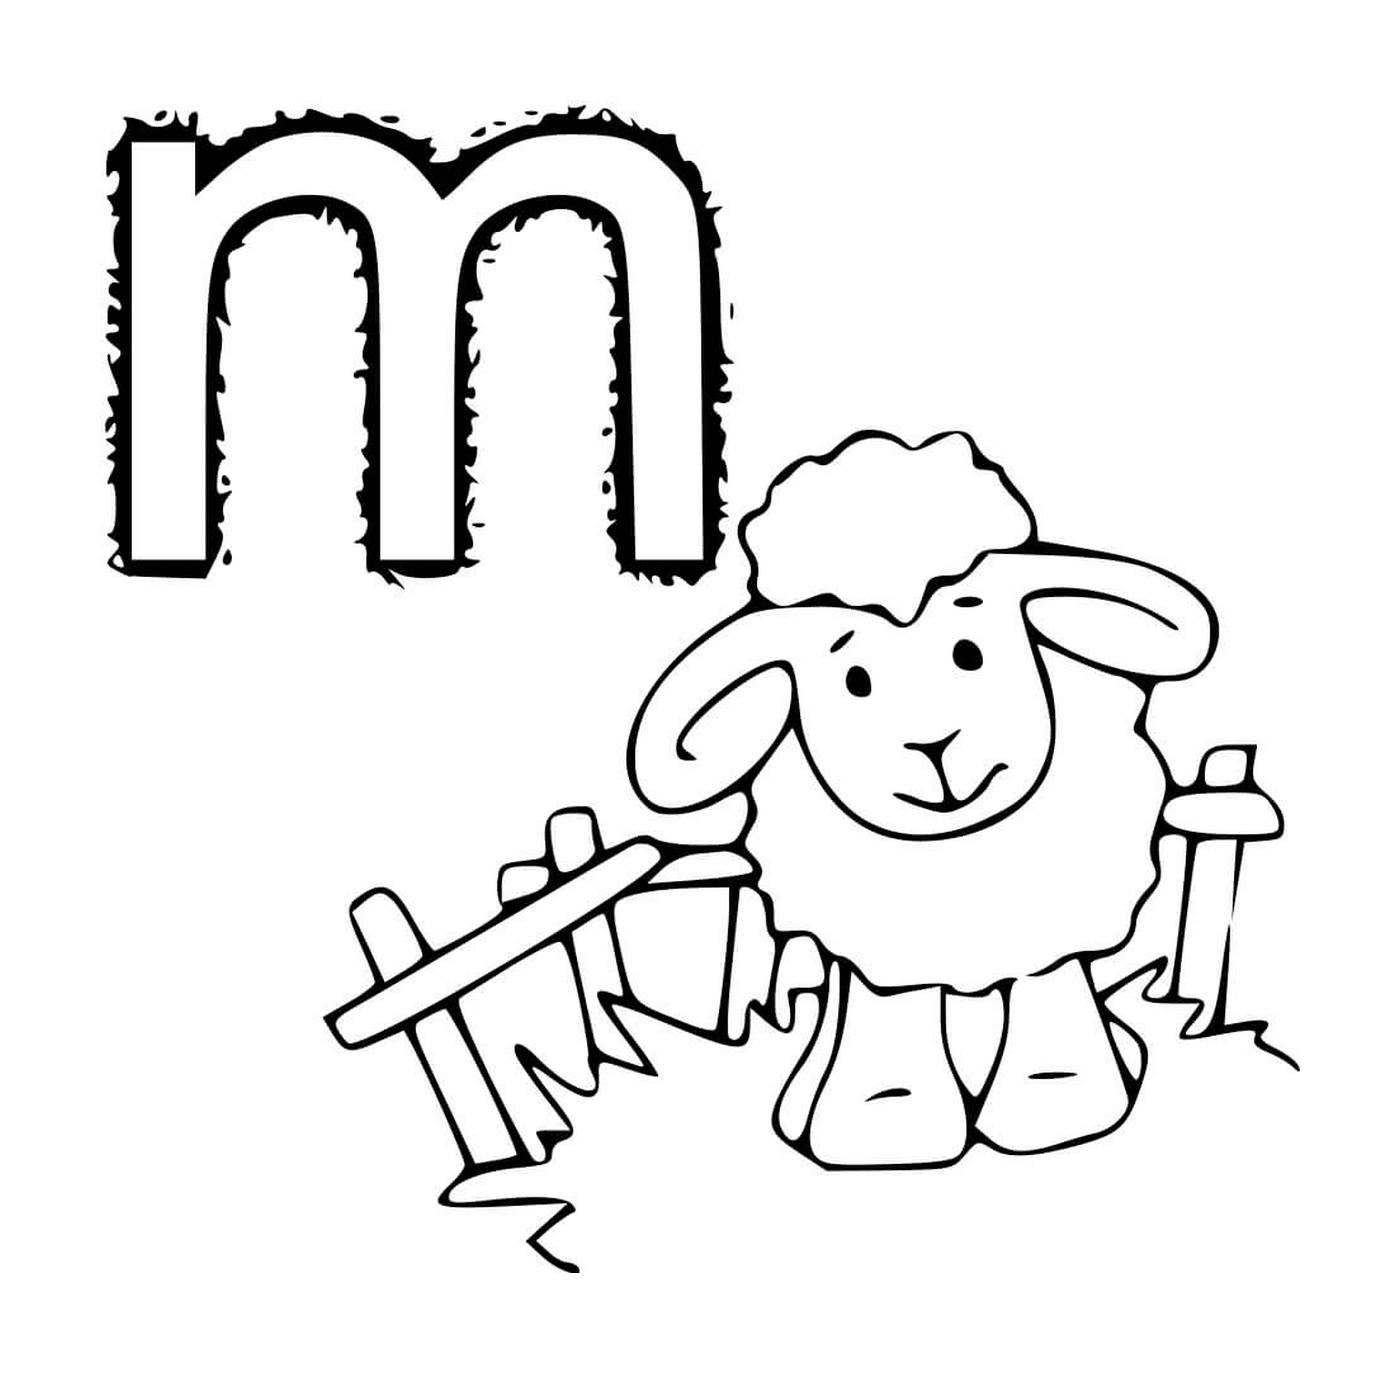  Sheep near fence, letter M 